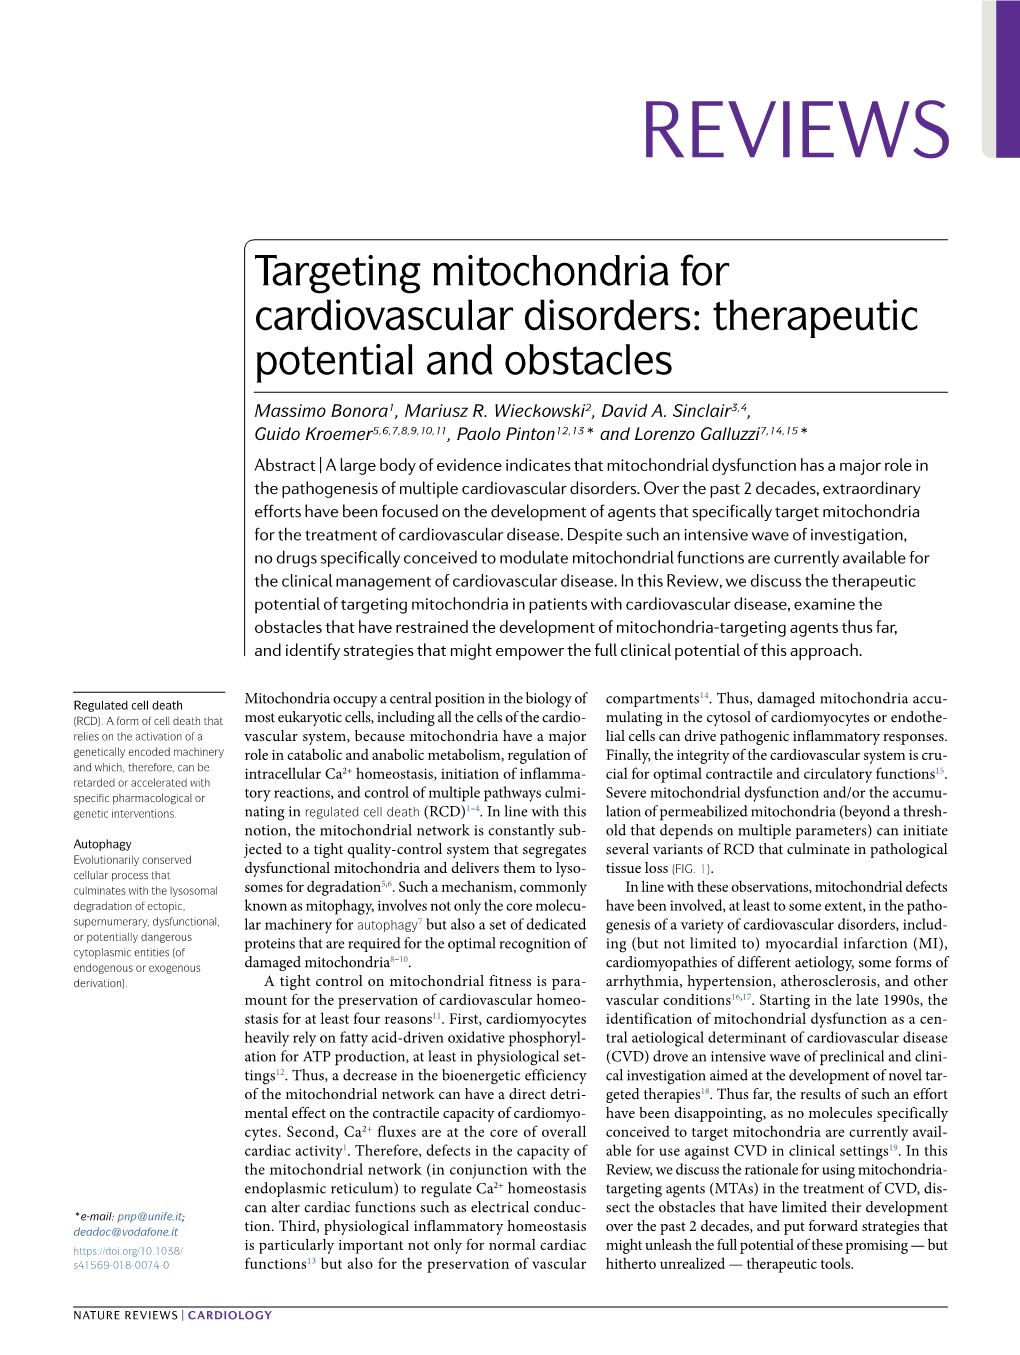 Targeting Mitochondria for Cardiovascular Disorders: Therapeutic Potential and Obstacles